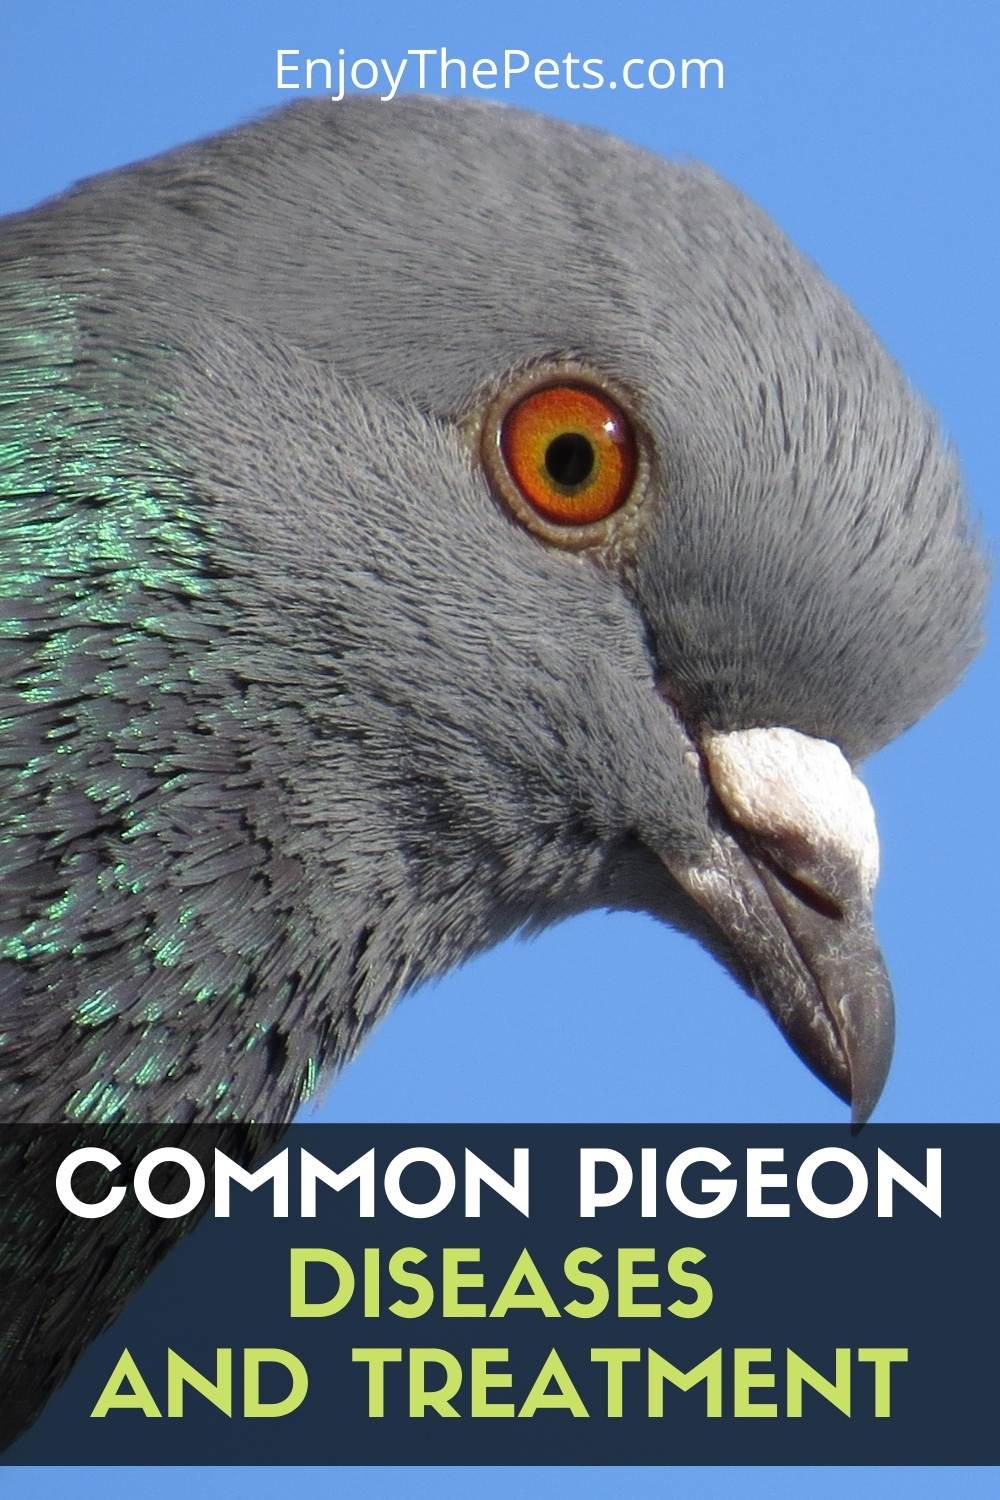 Common Pigeon Diseases and Treatment